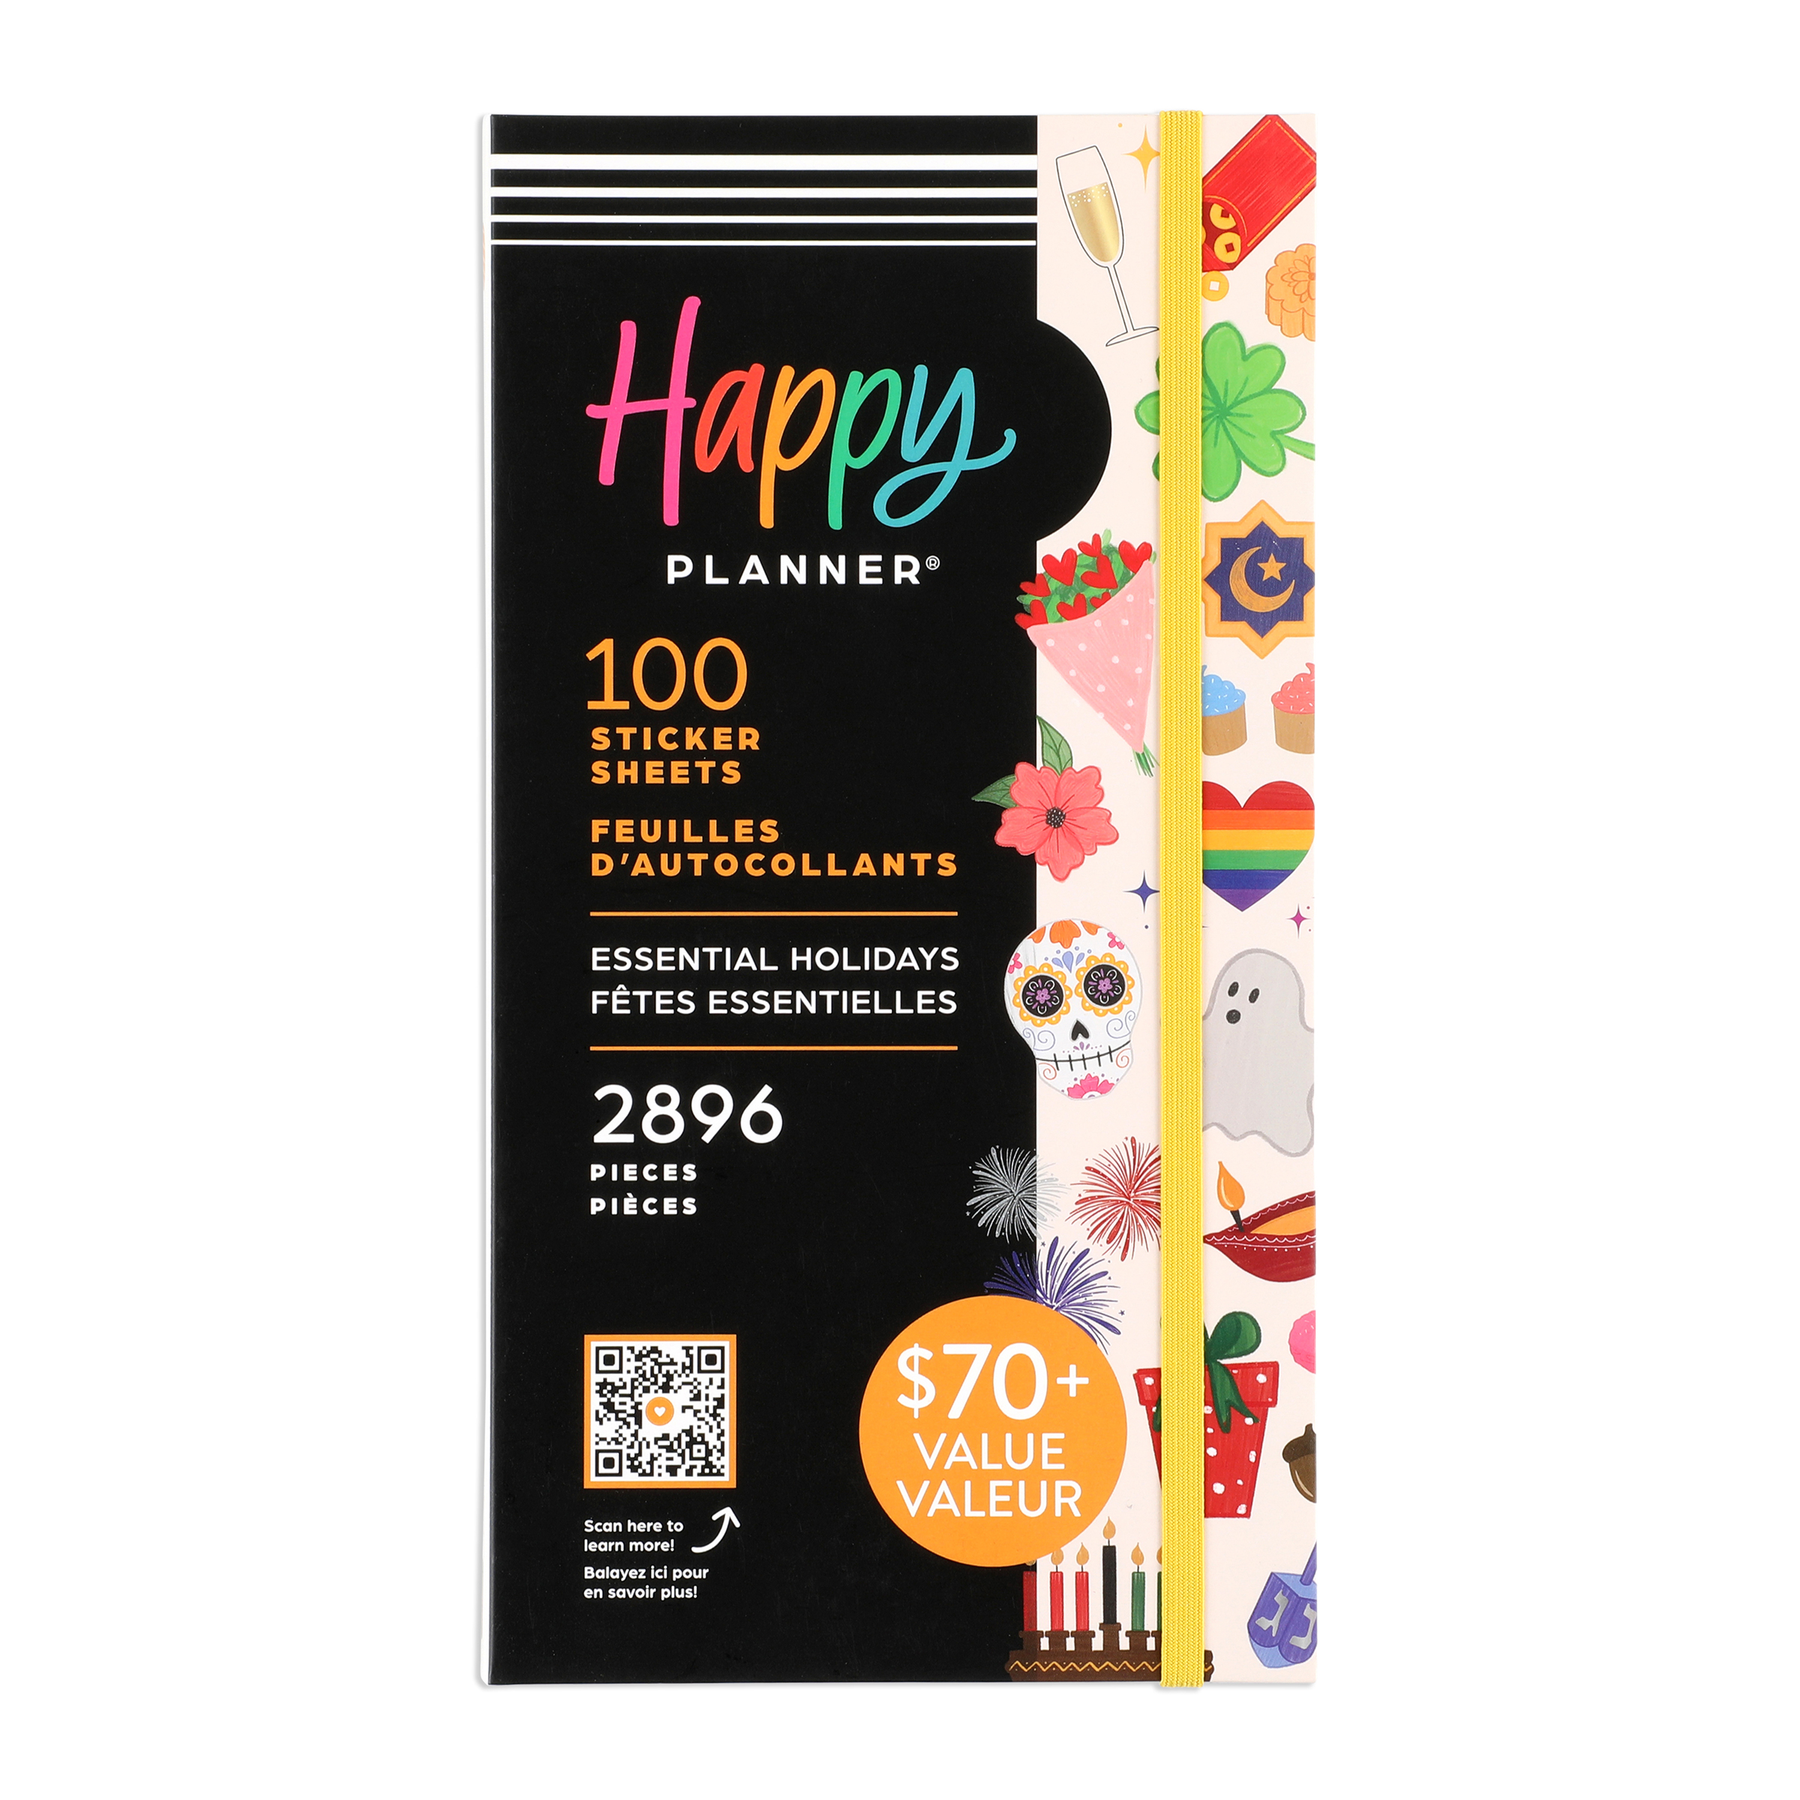 Annual Holiday Planner Stickers - Assorted Holiday Stickers - A Year o –  The Planner's World